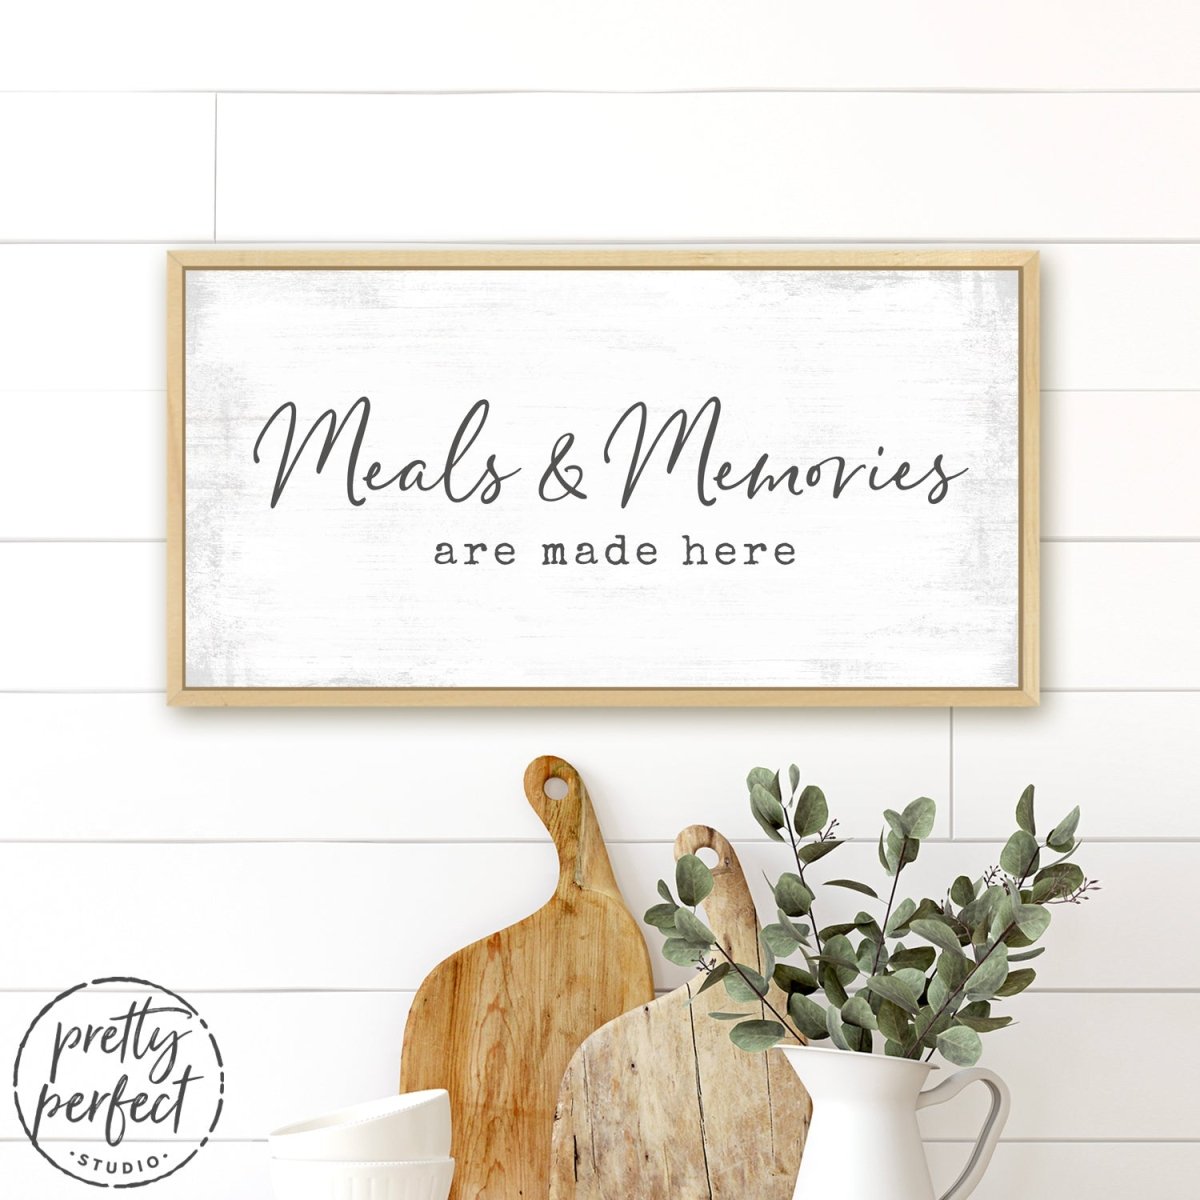 Meals And Memories Are Made Here Sign in Kitchen - Pretty Perfect Studio